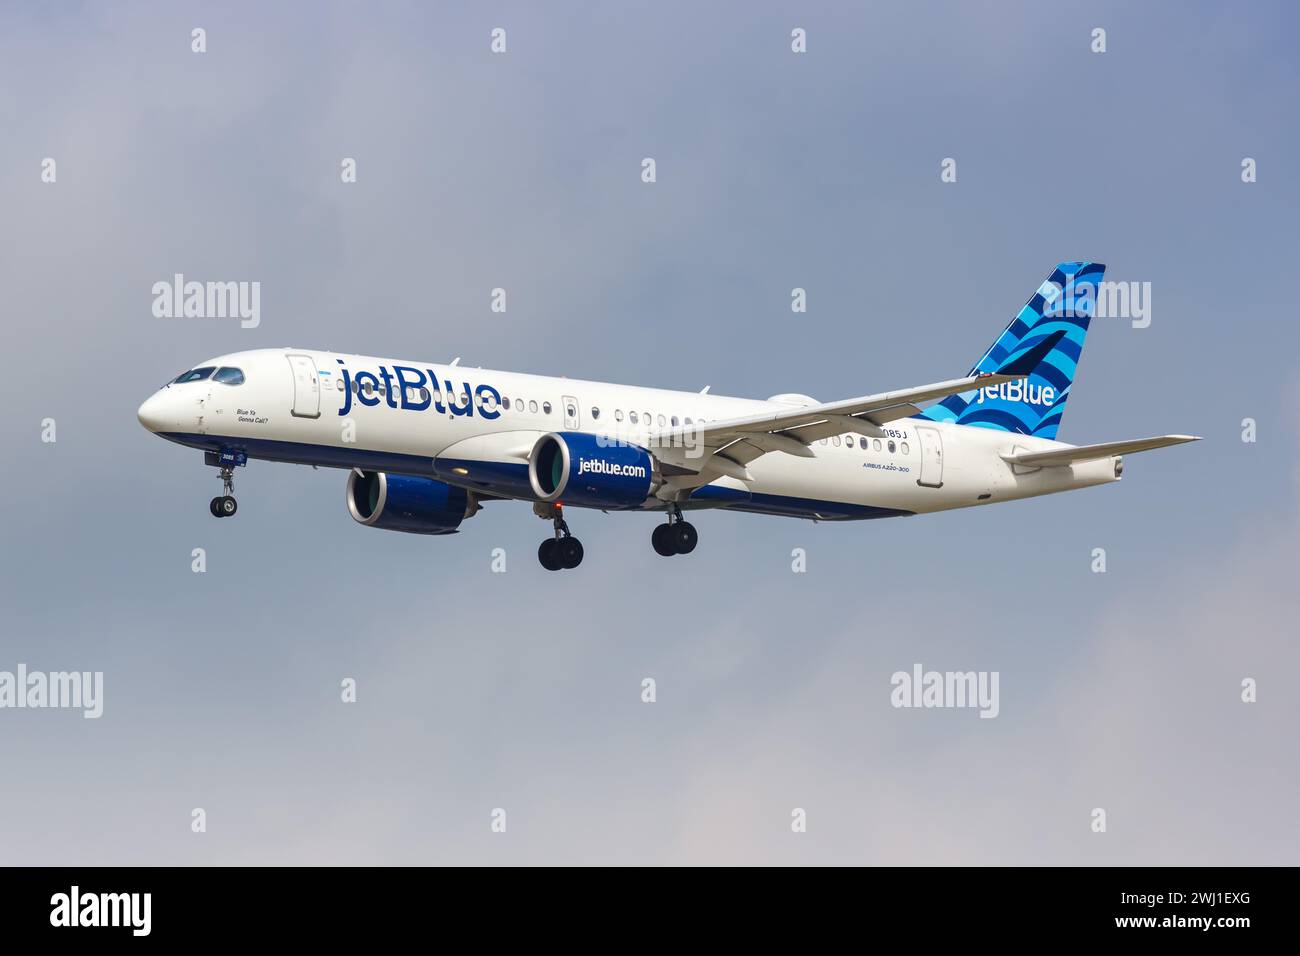 JetBlue Airbus A220-300 aircraft Dallas Fort Worth Airport in the USA Stock Photo